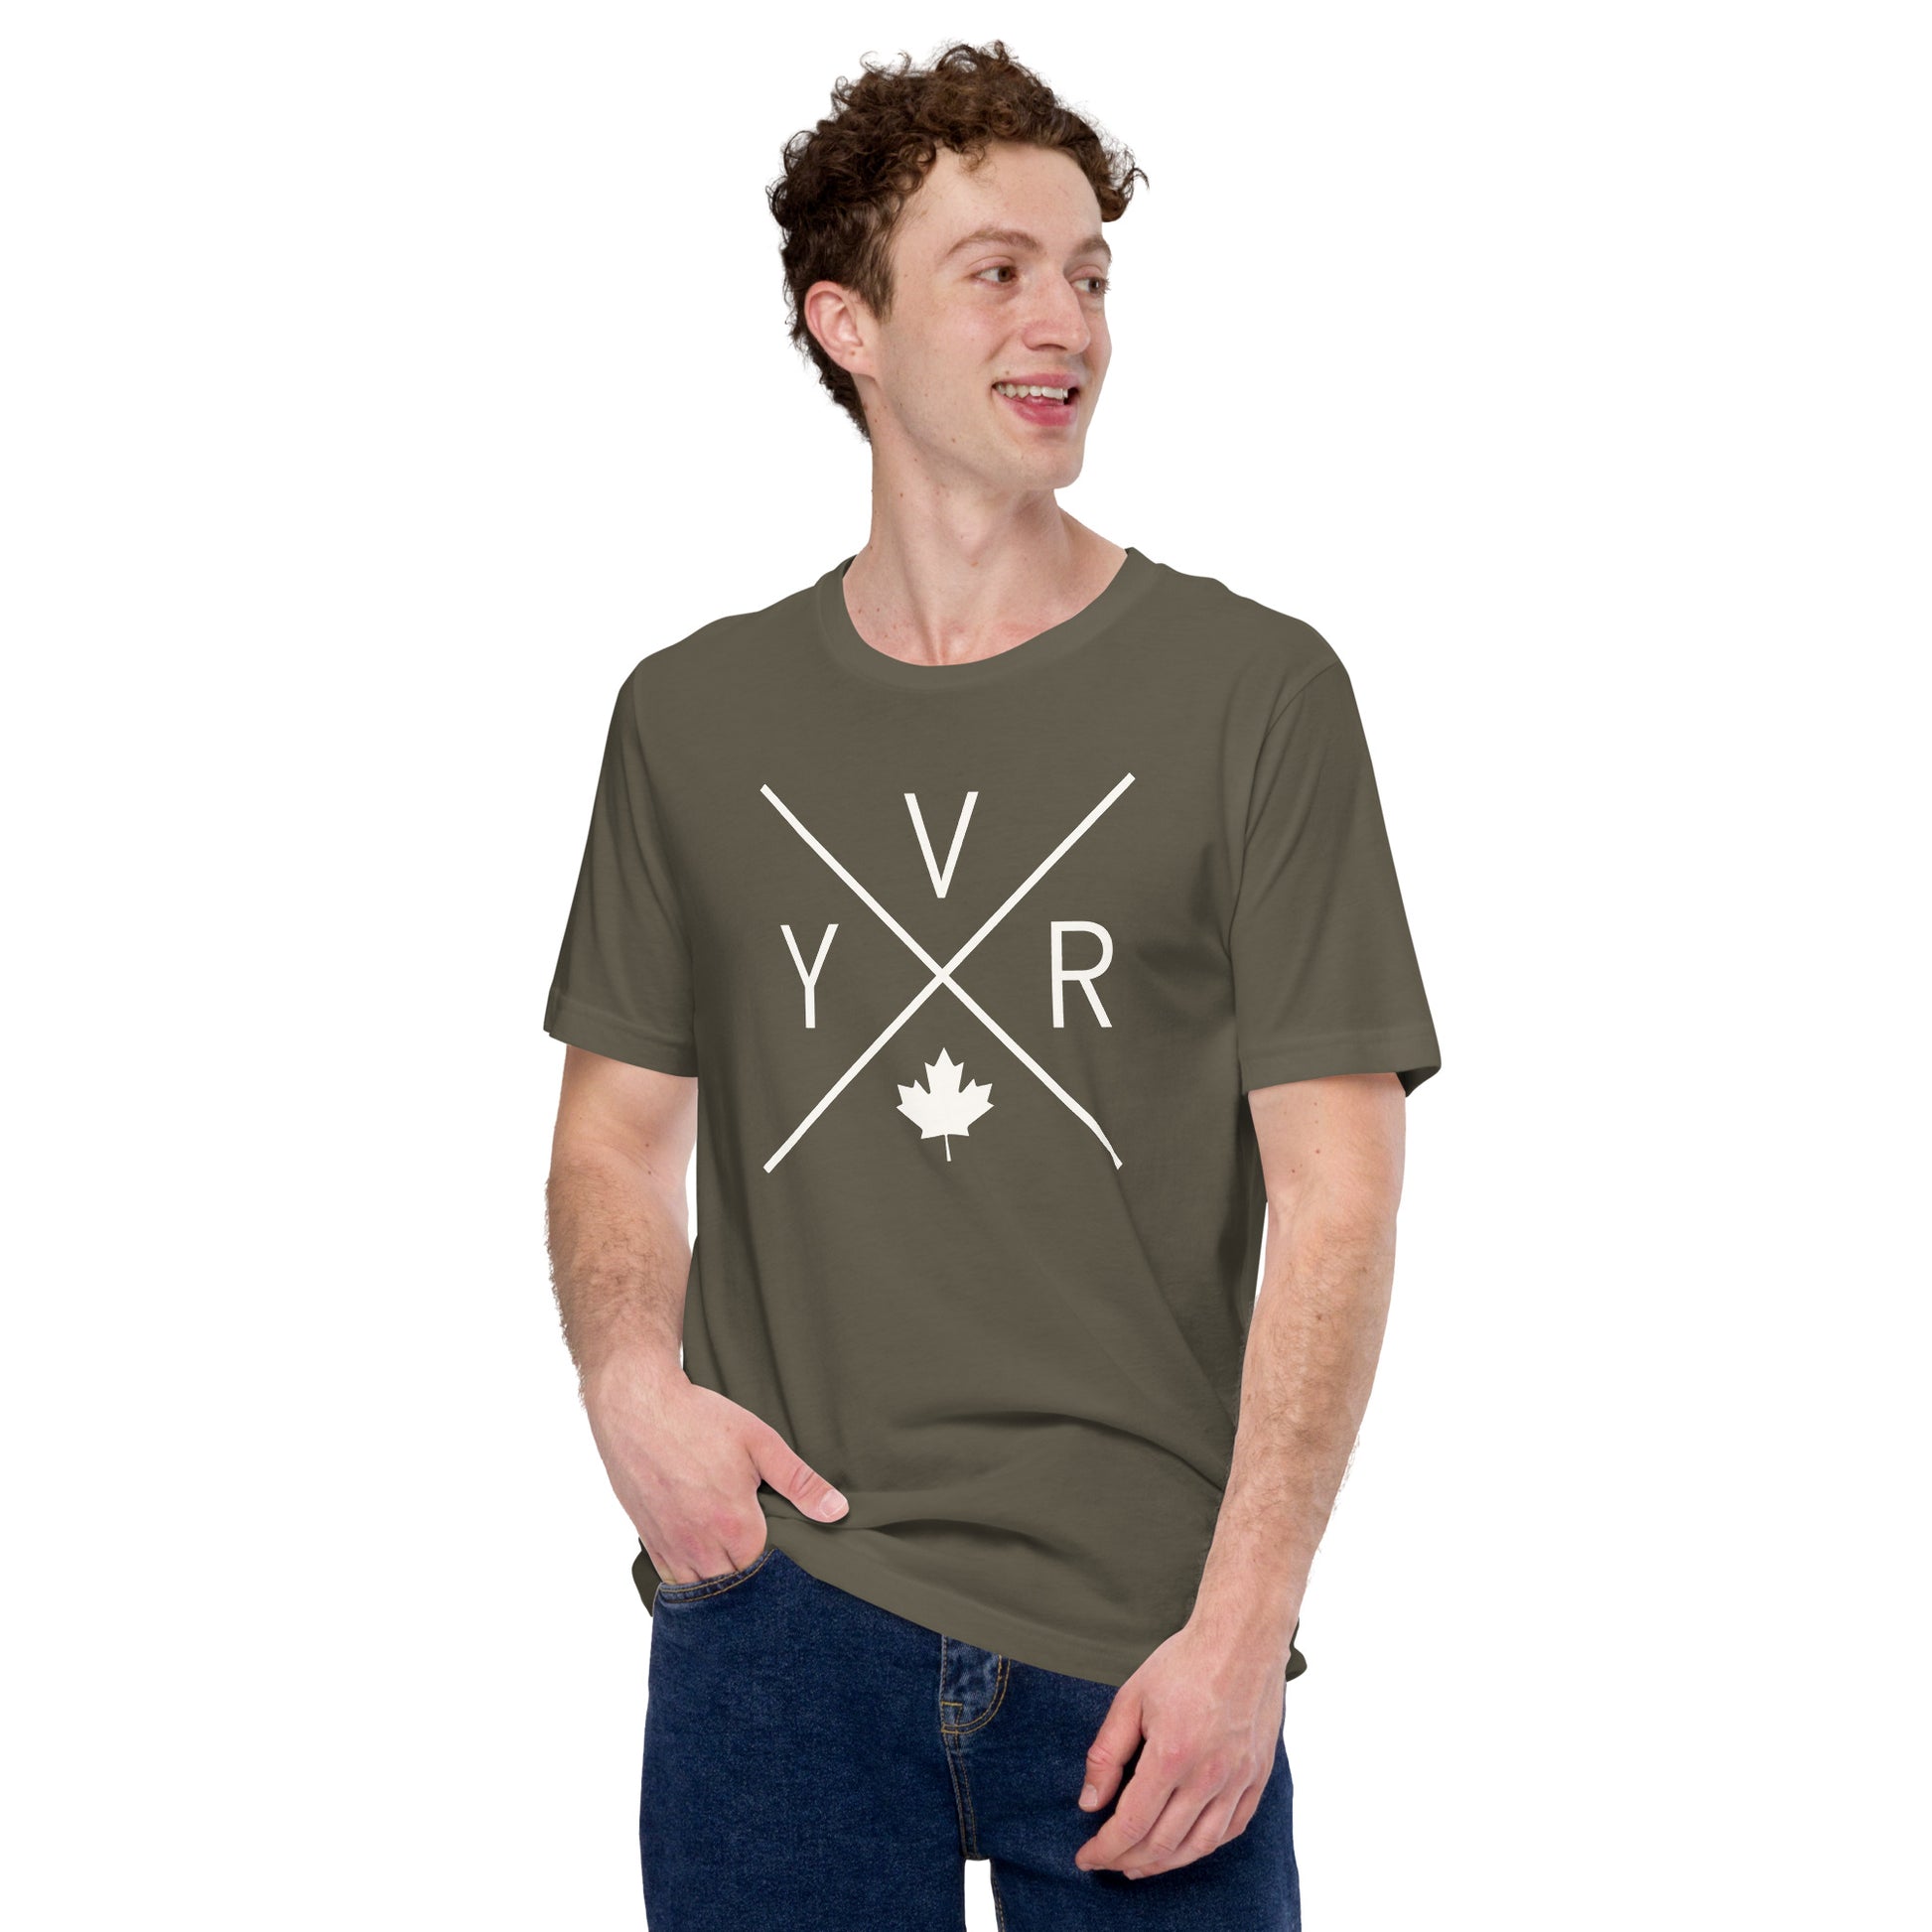 Crossed-X T-Shirt - White Graphic • YVR Vancouver • YHM Designs - Image 09